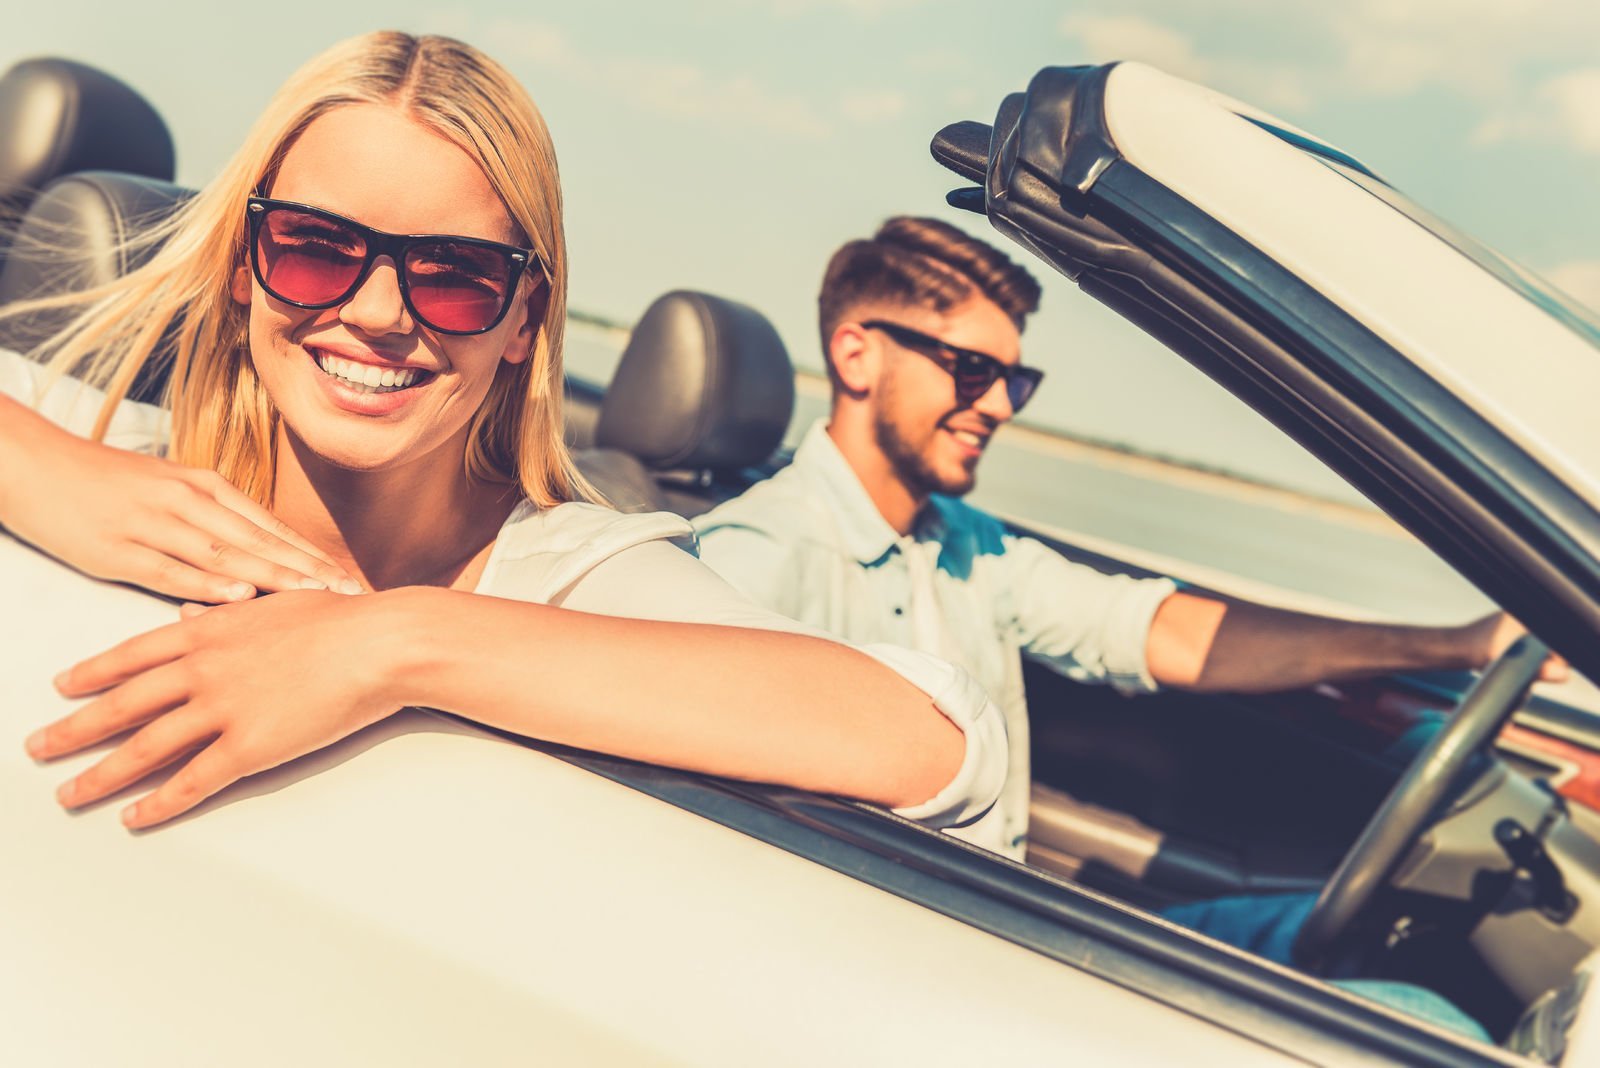 Why are car insurance rates higher for males?